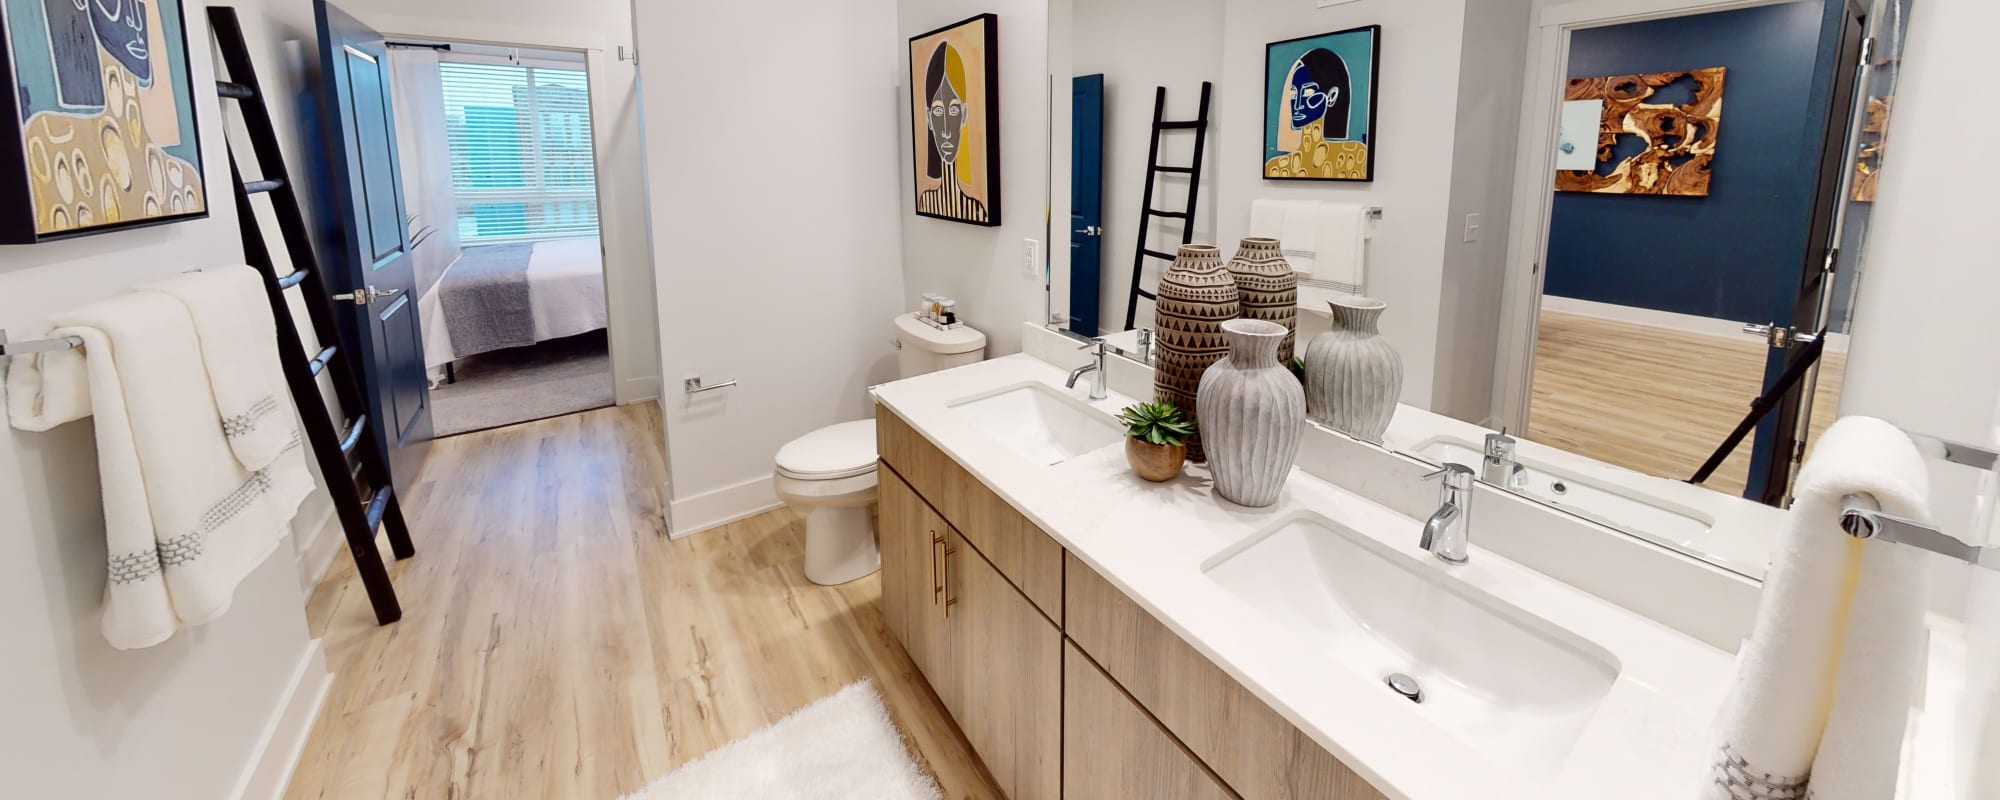 Beautiful Bathroom at Factory 52 Apartments | Brand-New Apartments in Norwood, OH